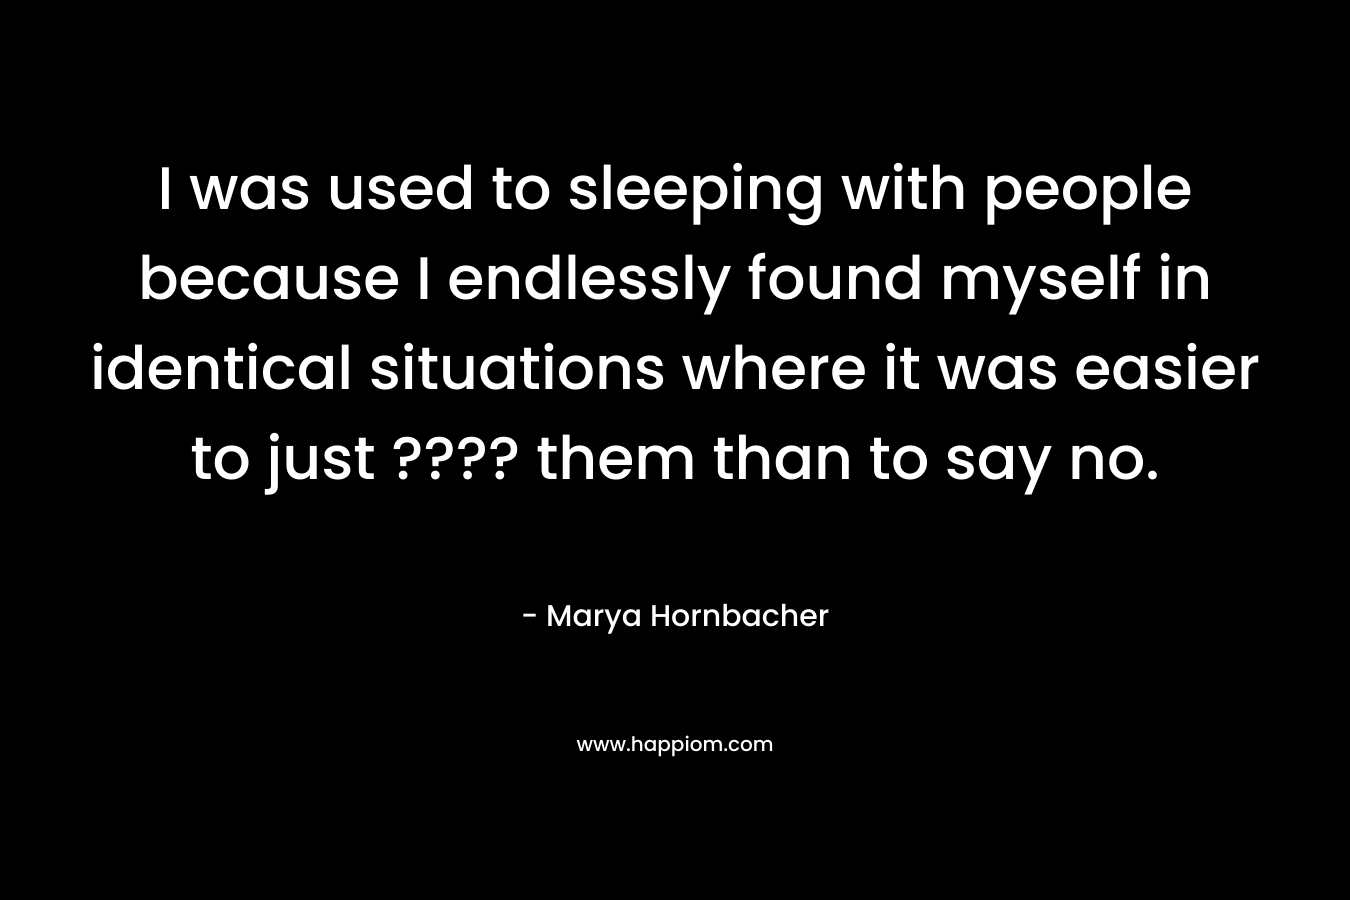 I was used to sleeping with people because I endlessly found myself in identical situations where it was easier to just ???? them than to say no. – Marya Hornbacher